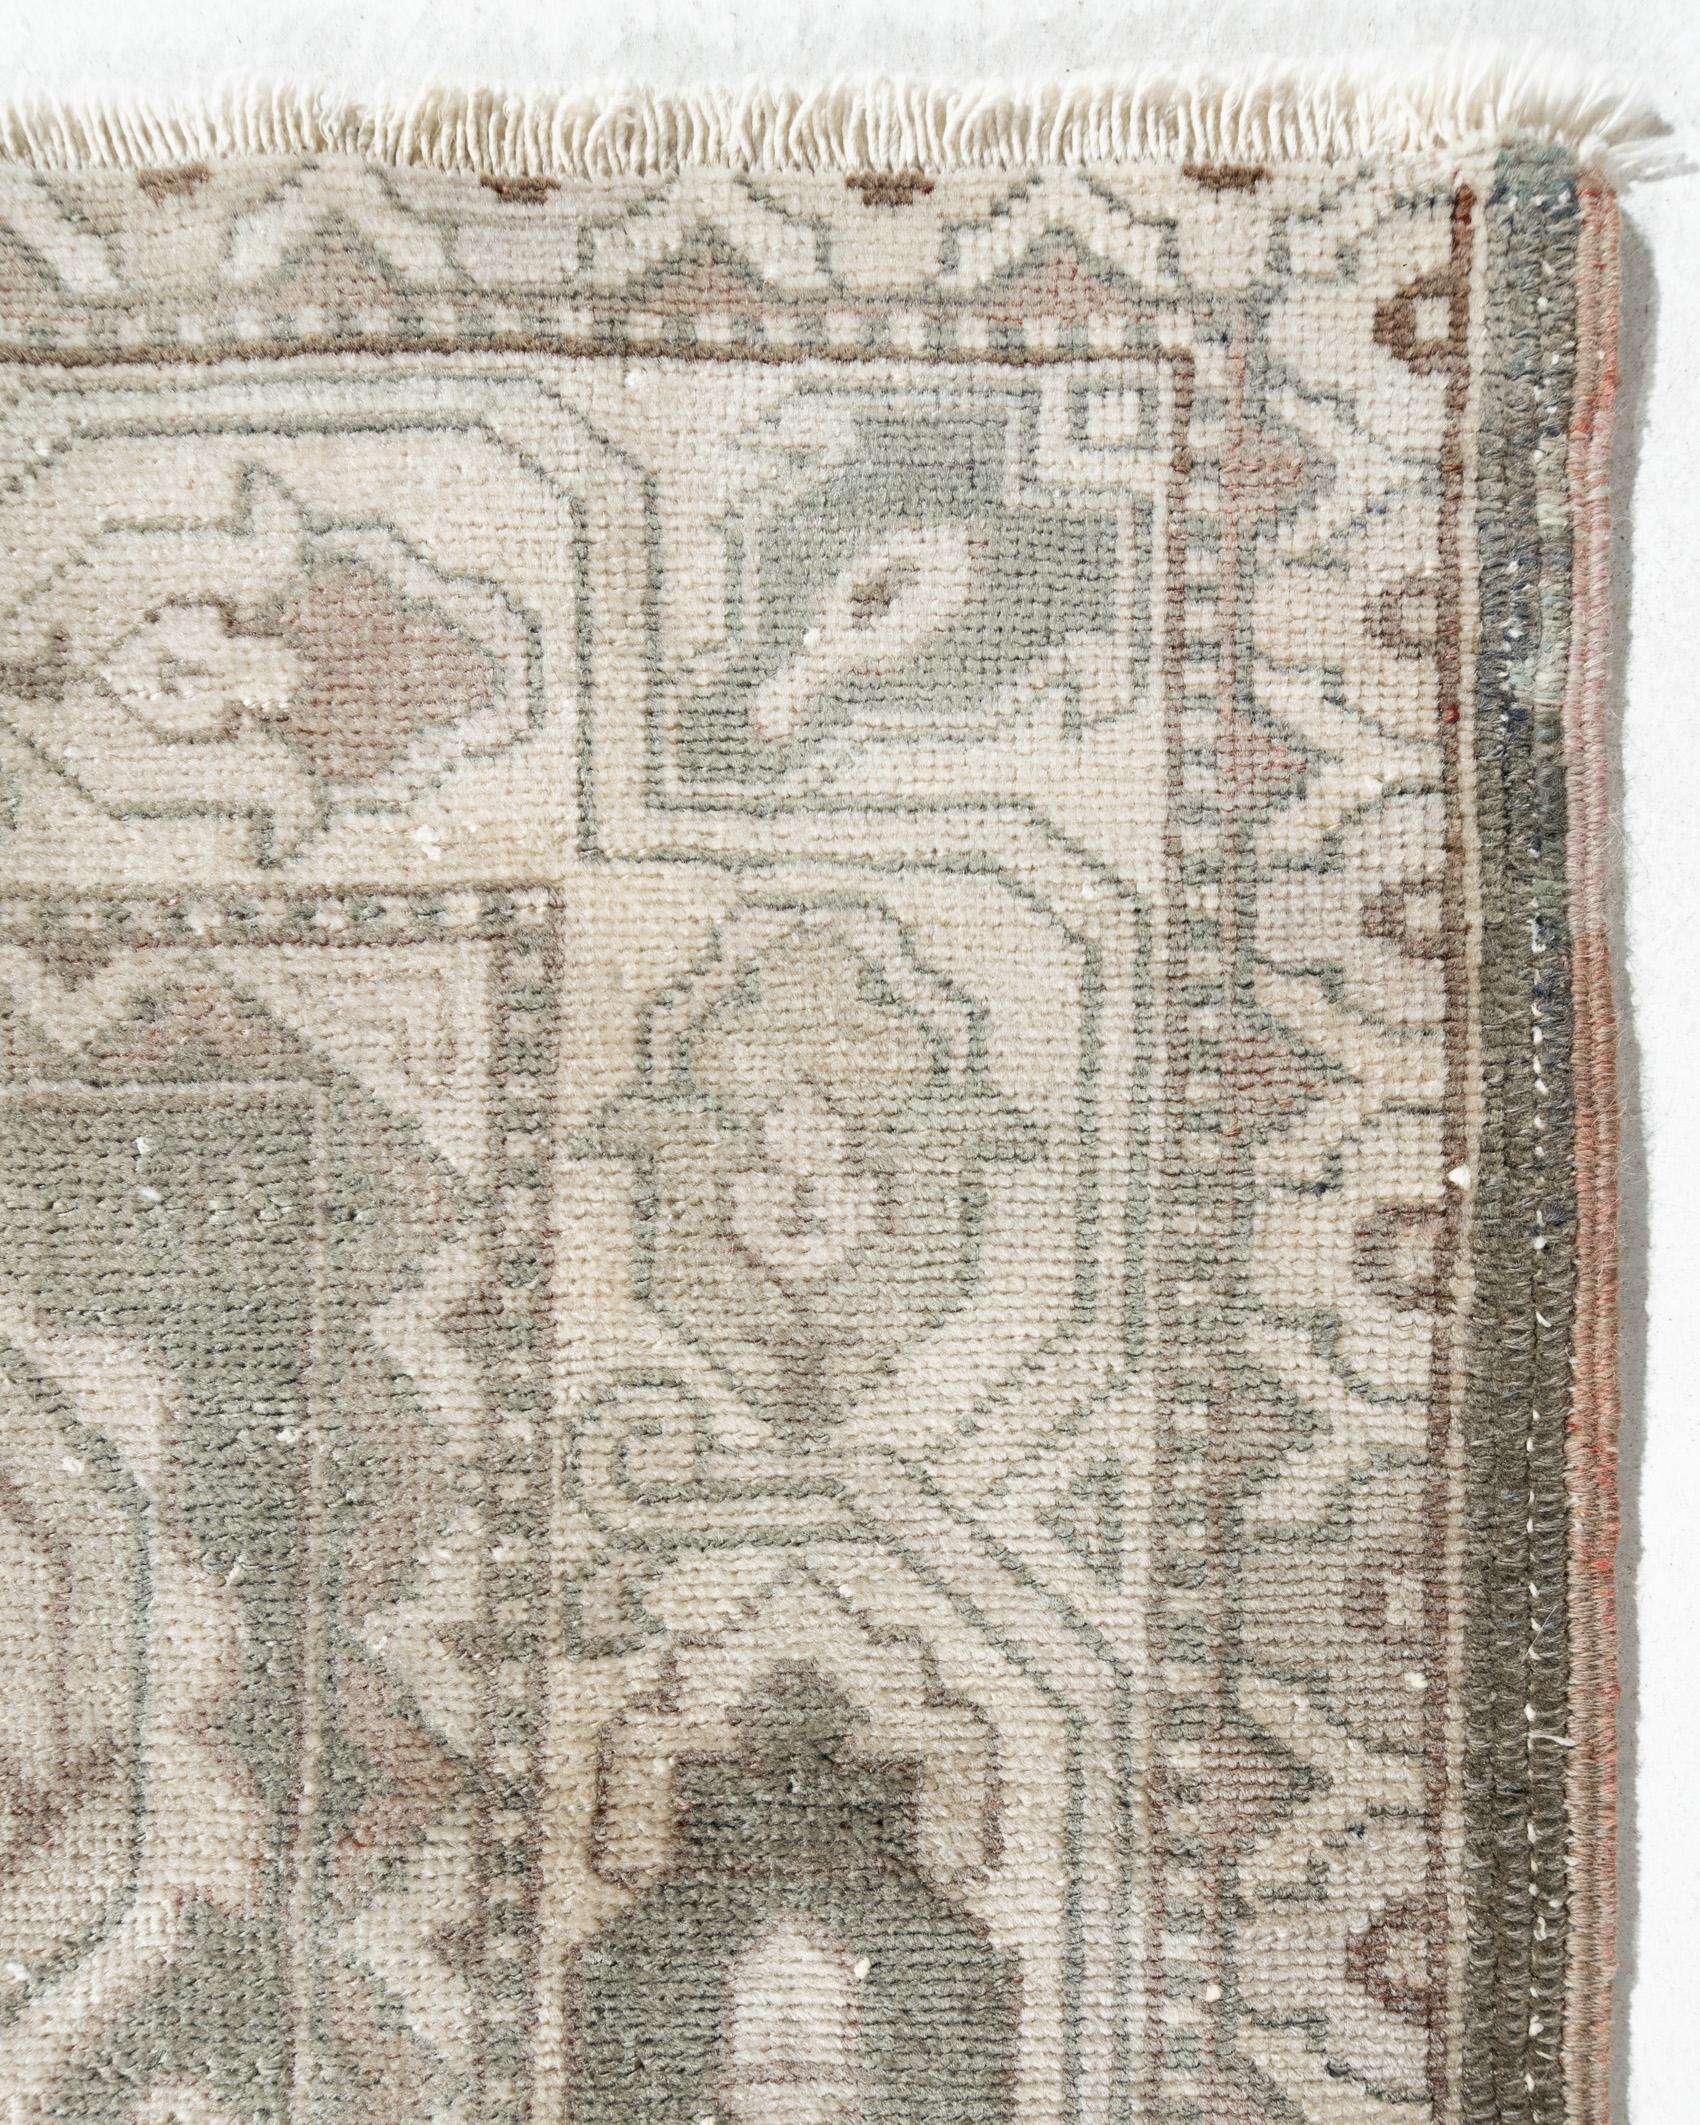 Vintage Turkish Oushak Runner 2'2 X 10'11. The luxurious quality of the wool (for which Oushaks have always been famous) contributed to the vibrancy of the colors. Unlike most Turkish rugs, Oushak rugs were heavily influenced by Persian design. Many